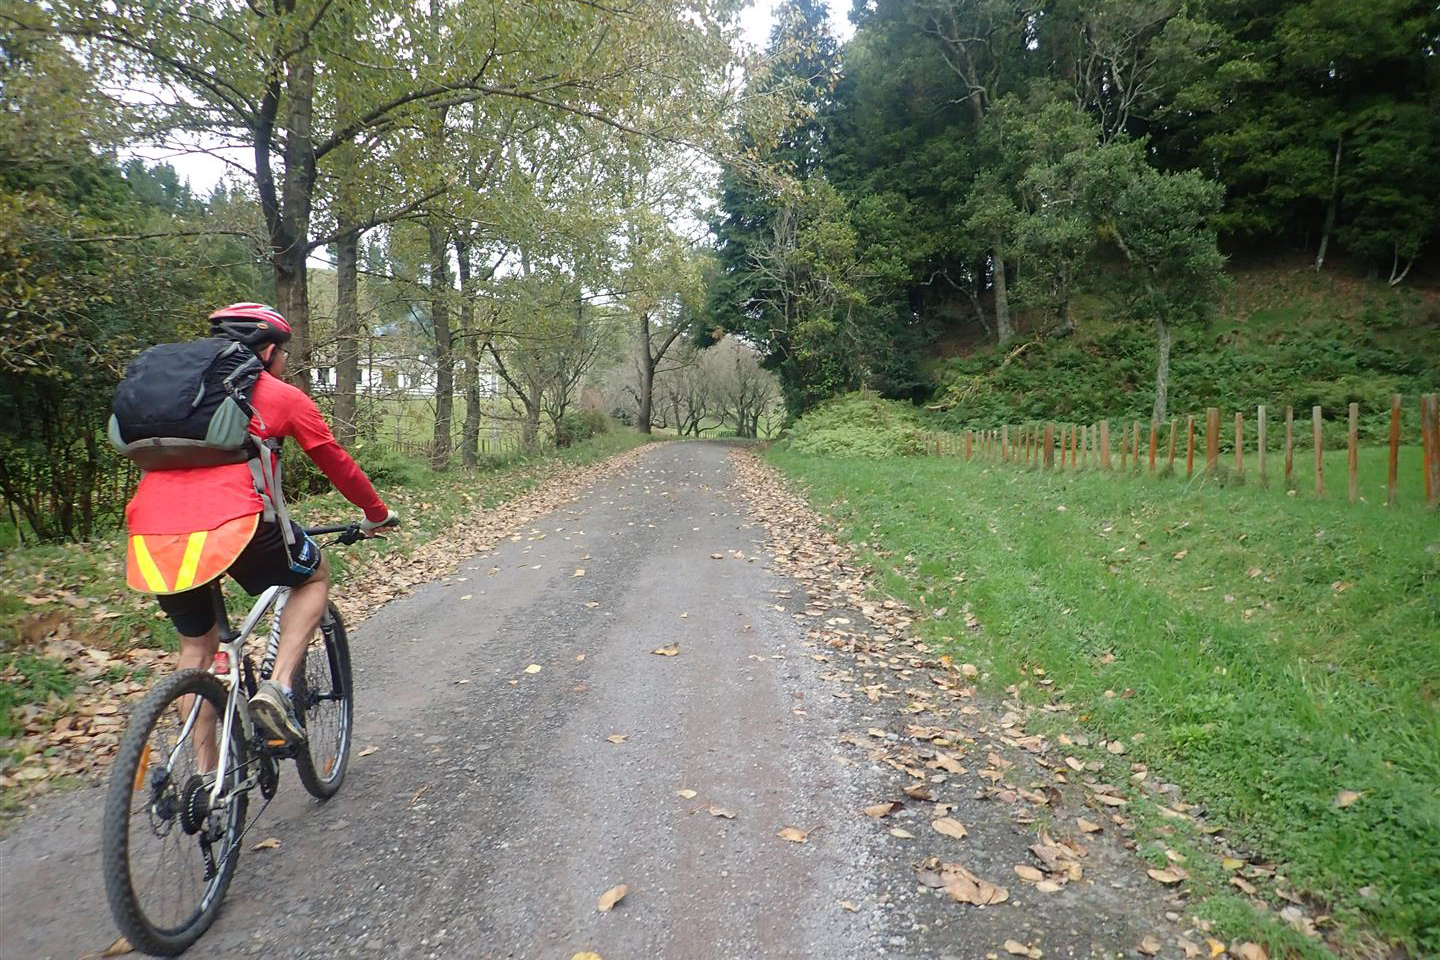 Cyclist with a red jacket and black bag on his back seen from behind as he cycles down an unsealed track.